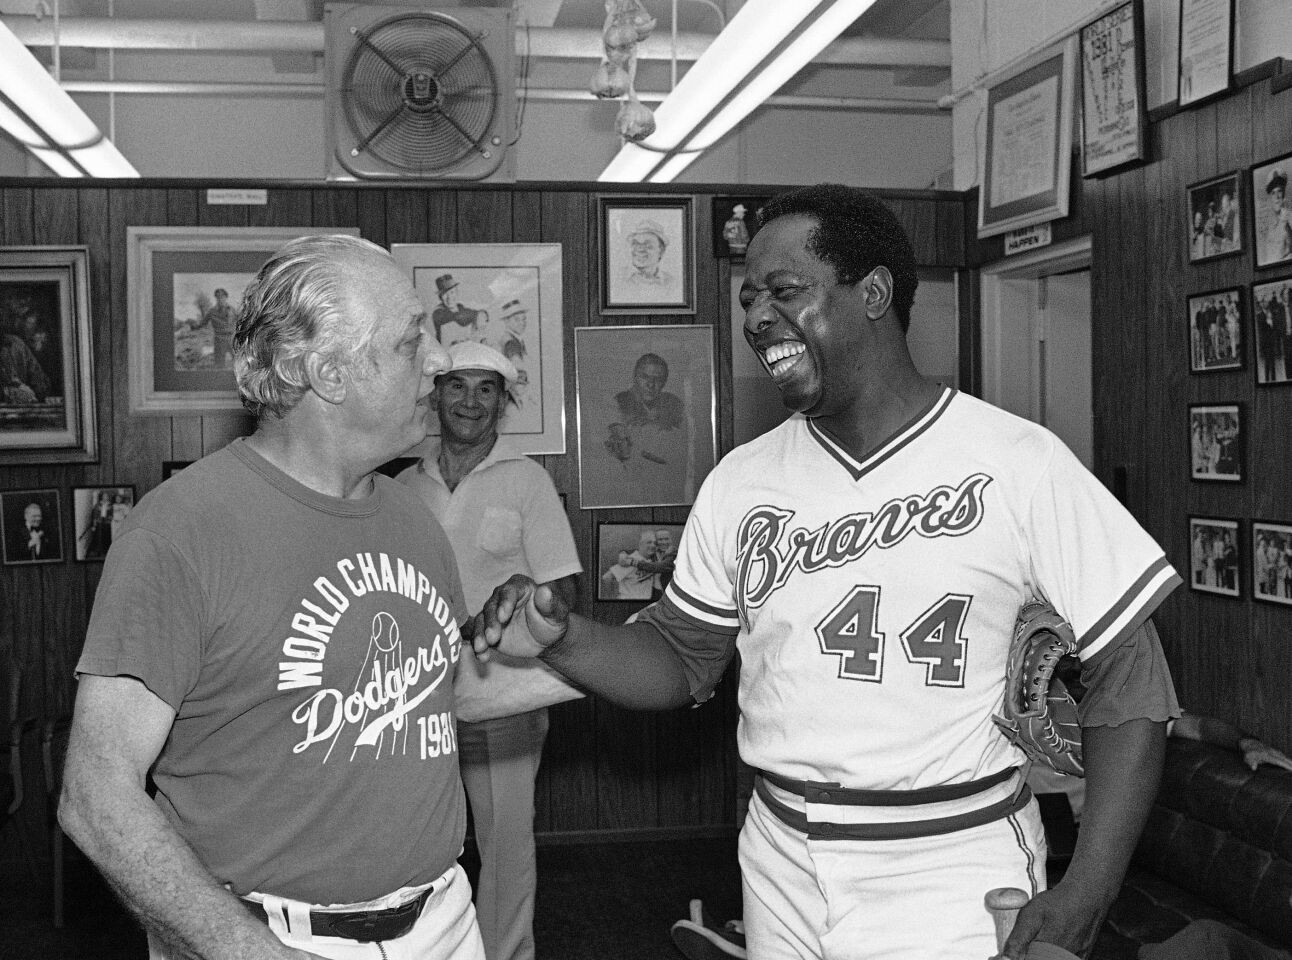 Hank Aaron, right, jokes with Los Angeles Dodgers manager Tommy Lasorda